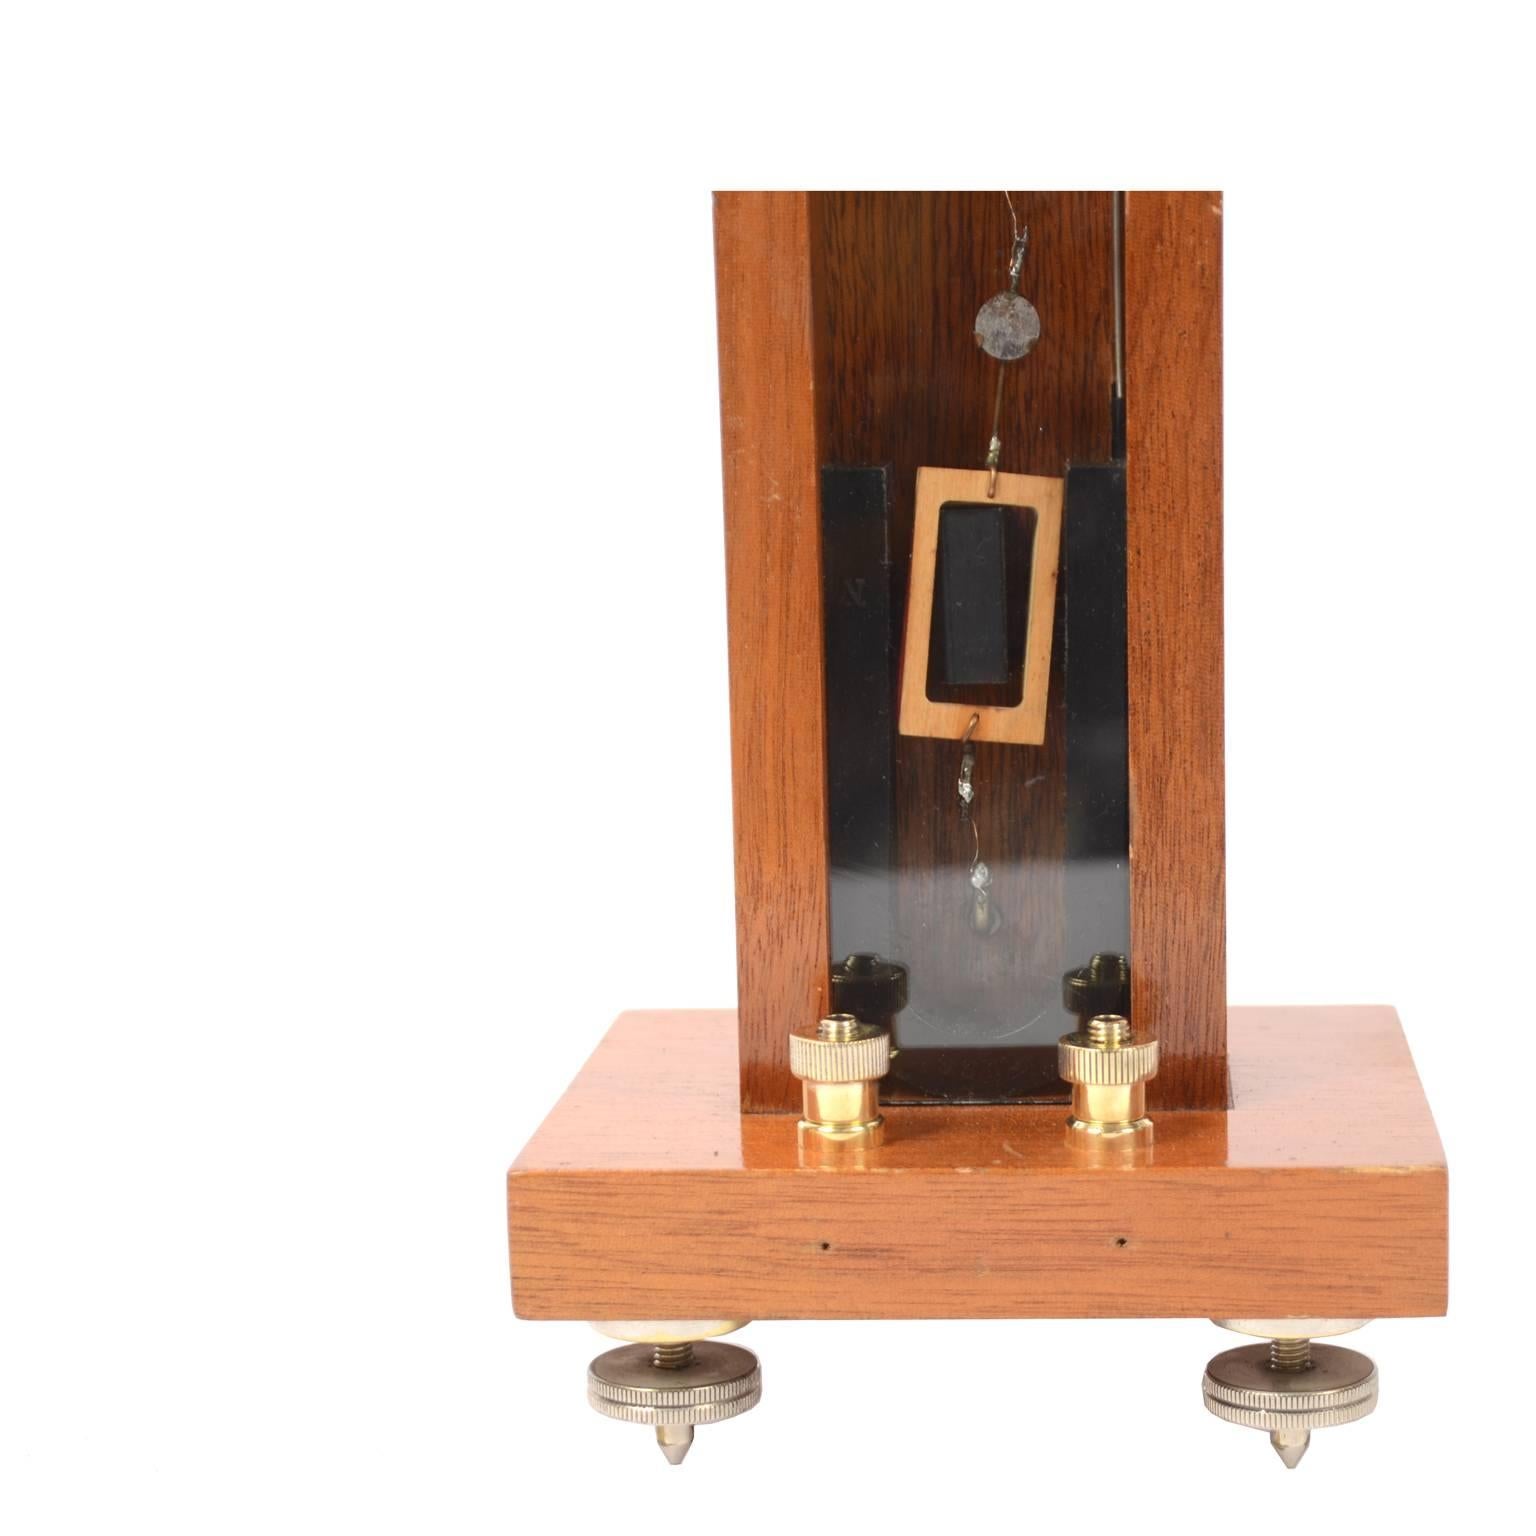 Mid-19th Century Galvanometer Antique Measuring Instrument Used for Telegraph Cables 1850 circa For Sale